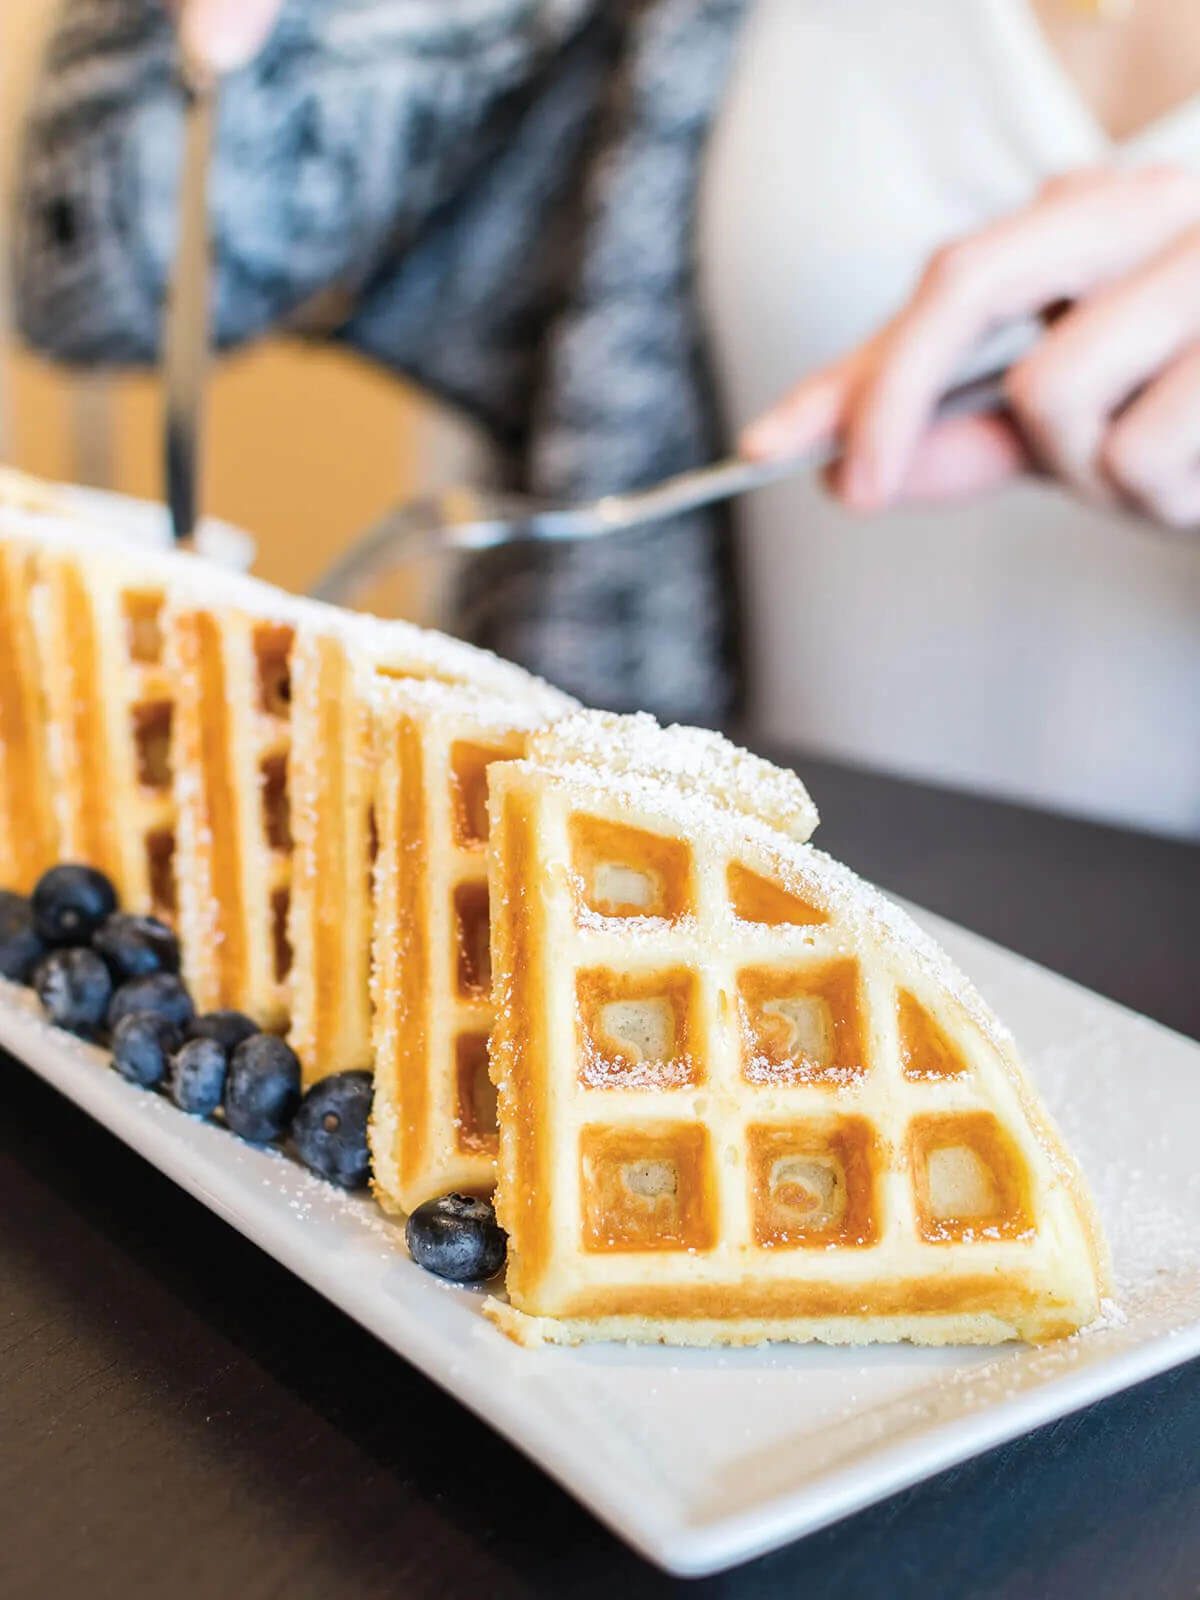 A plate of waffles with blueberries